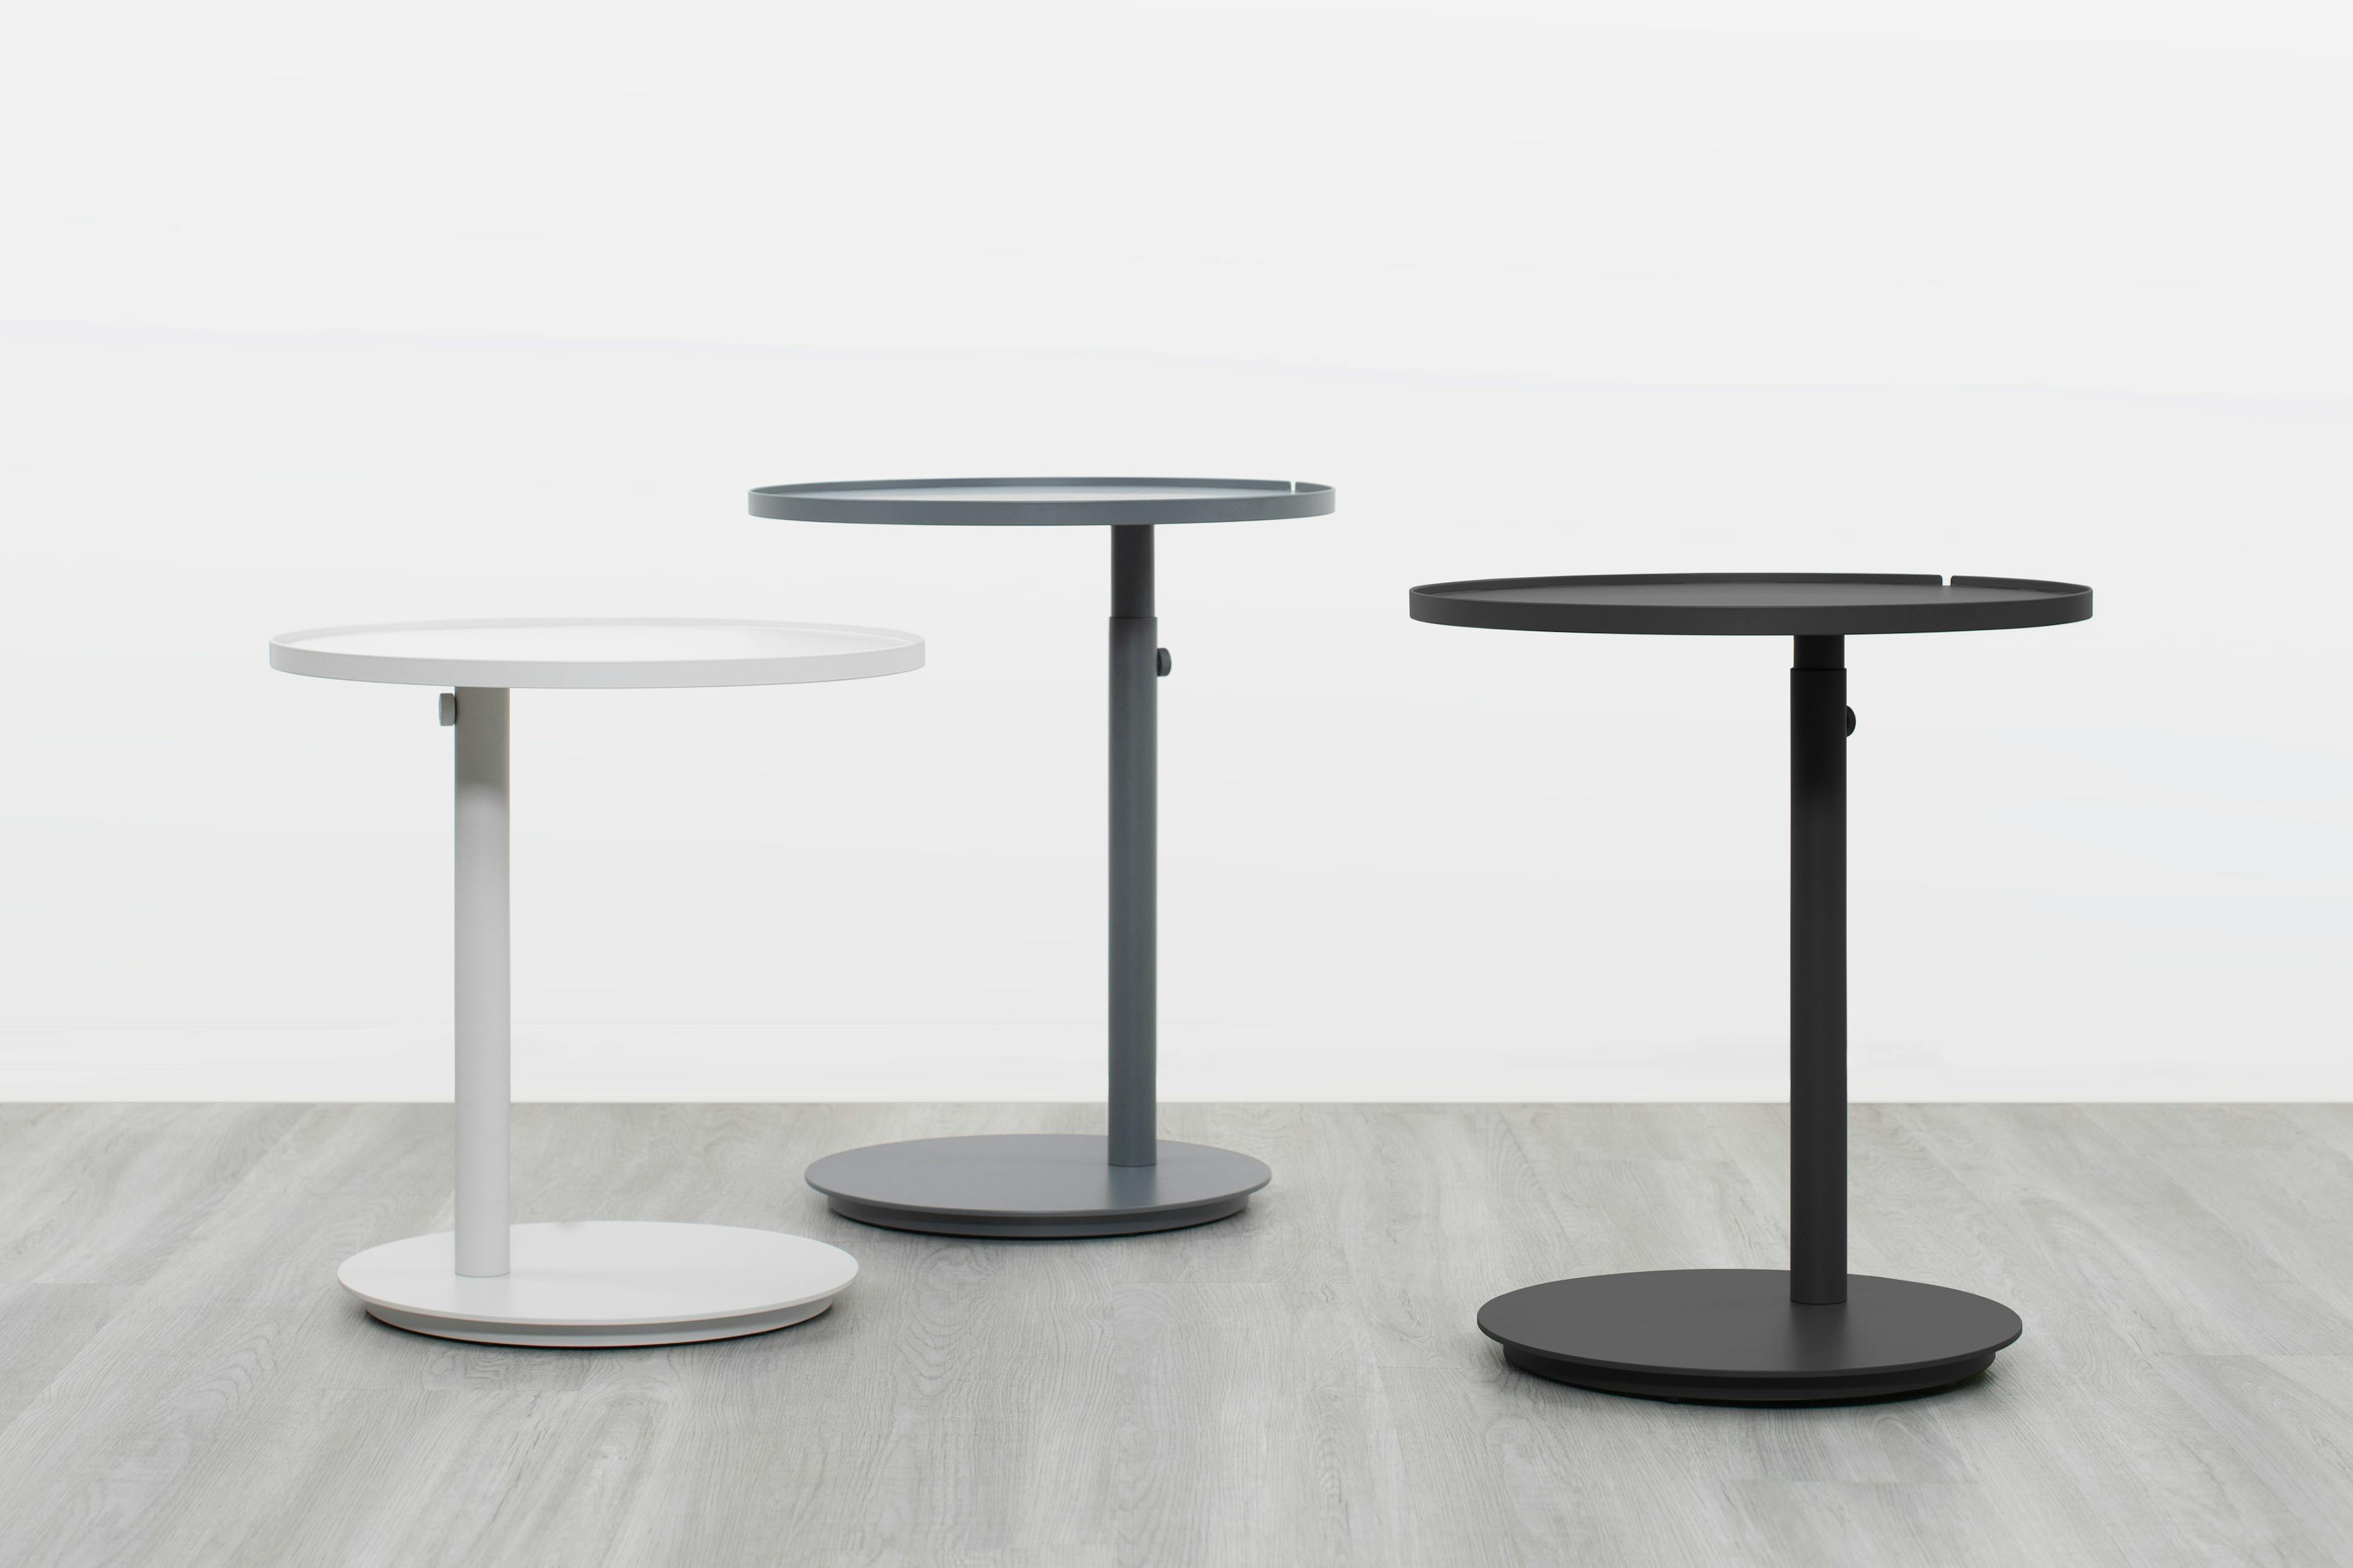 The Side Table in Matte Black, Perfect for Modern Home Decor